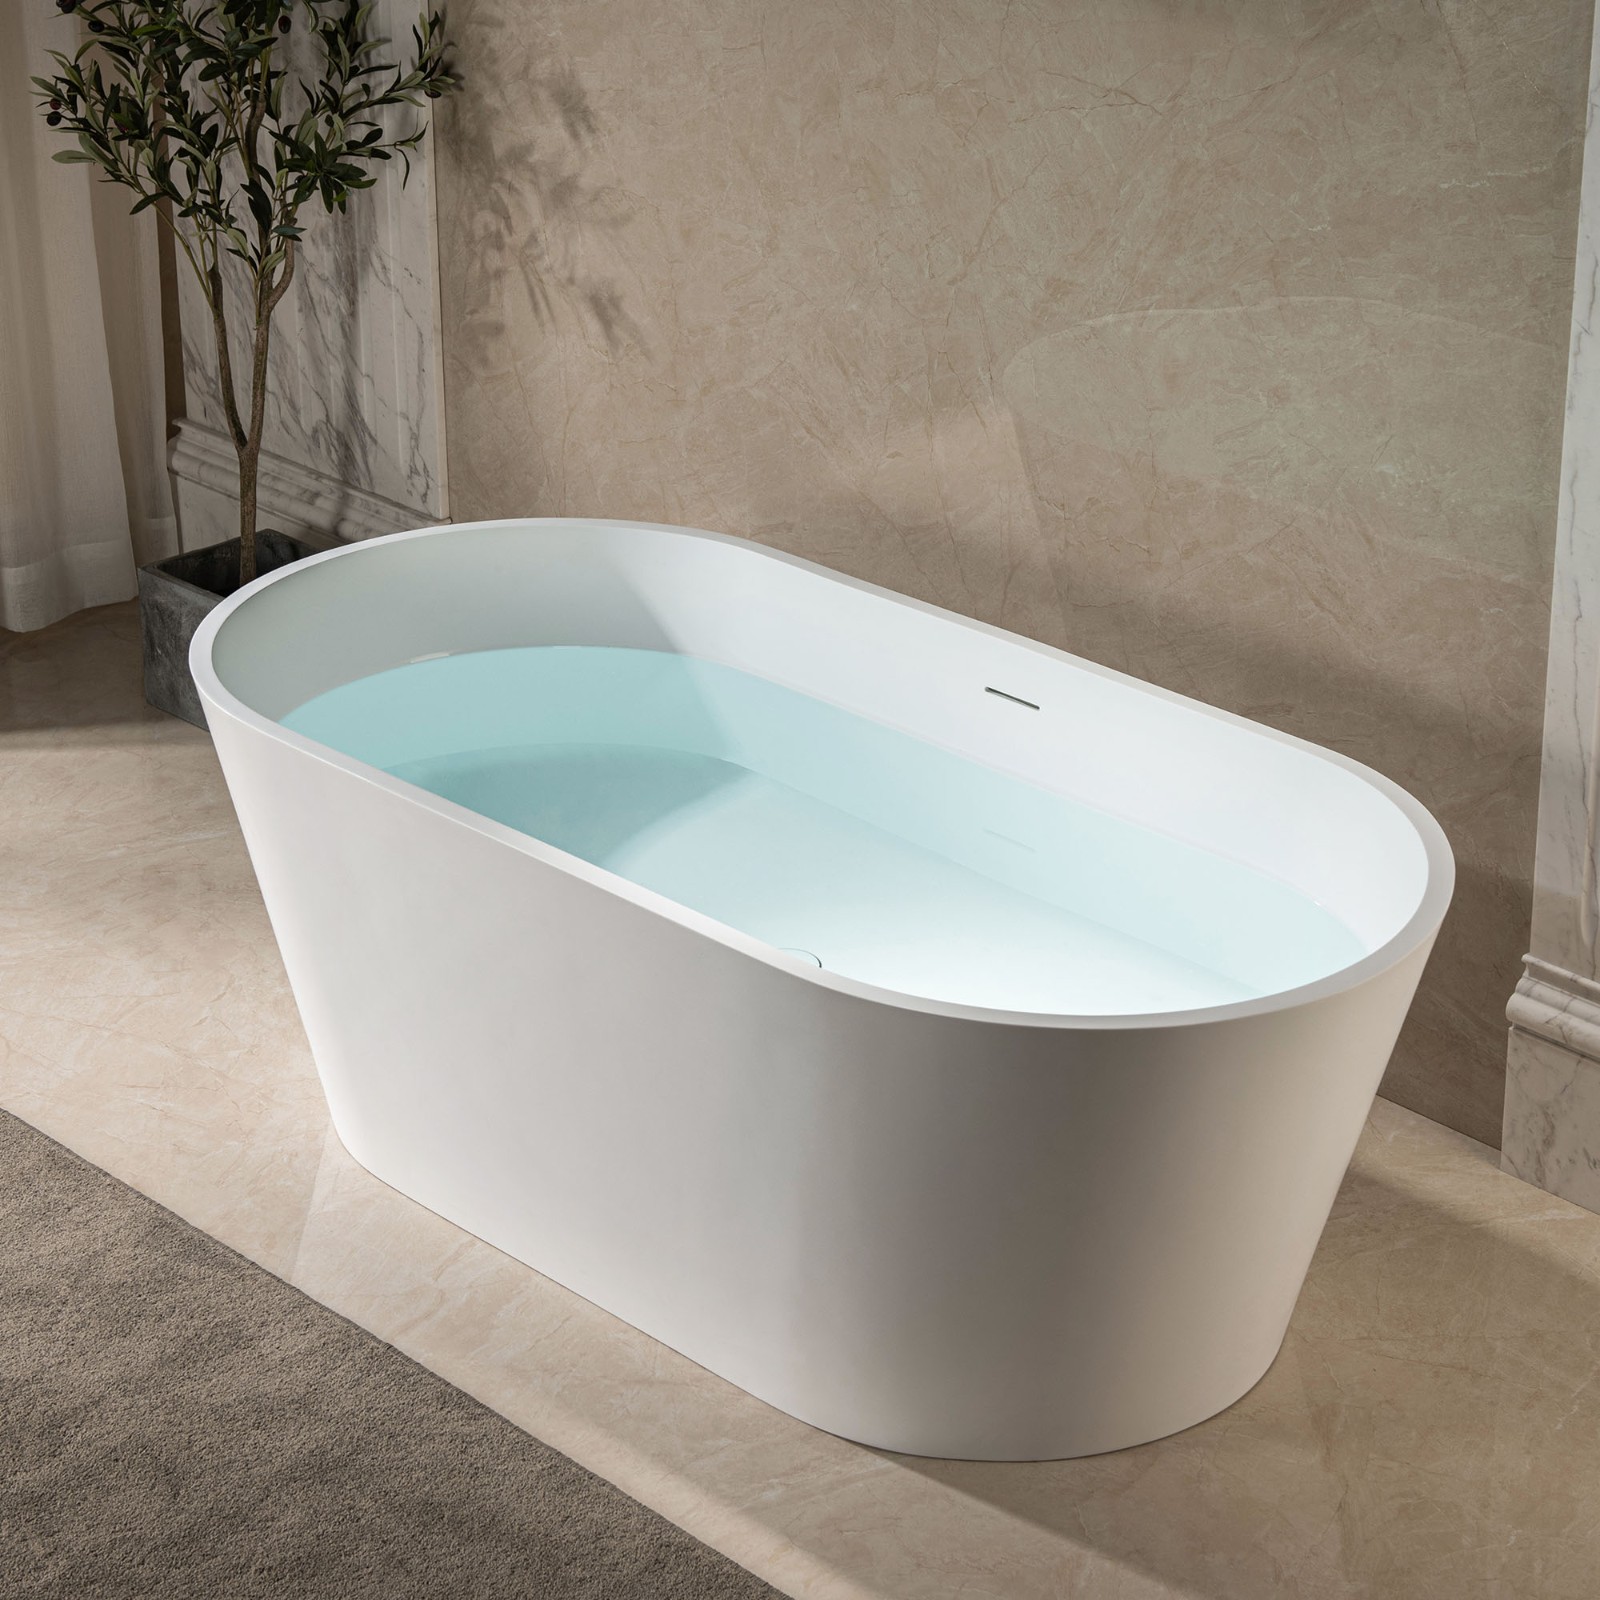  WOODBRIDGE 59 in. x 29 in. Luxury Contemporary Solid Surface Freestanding Bathtub in Matte White_647